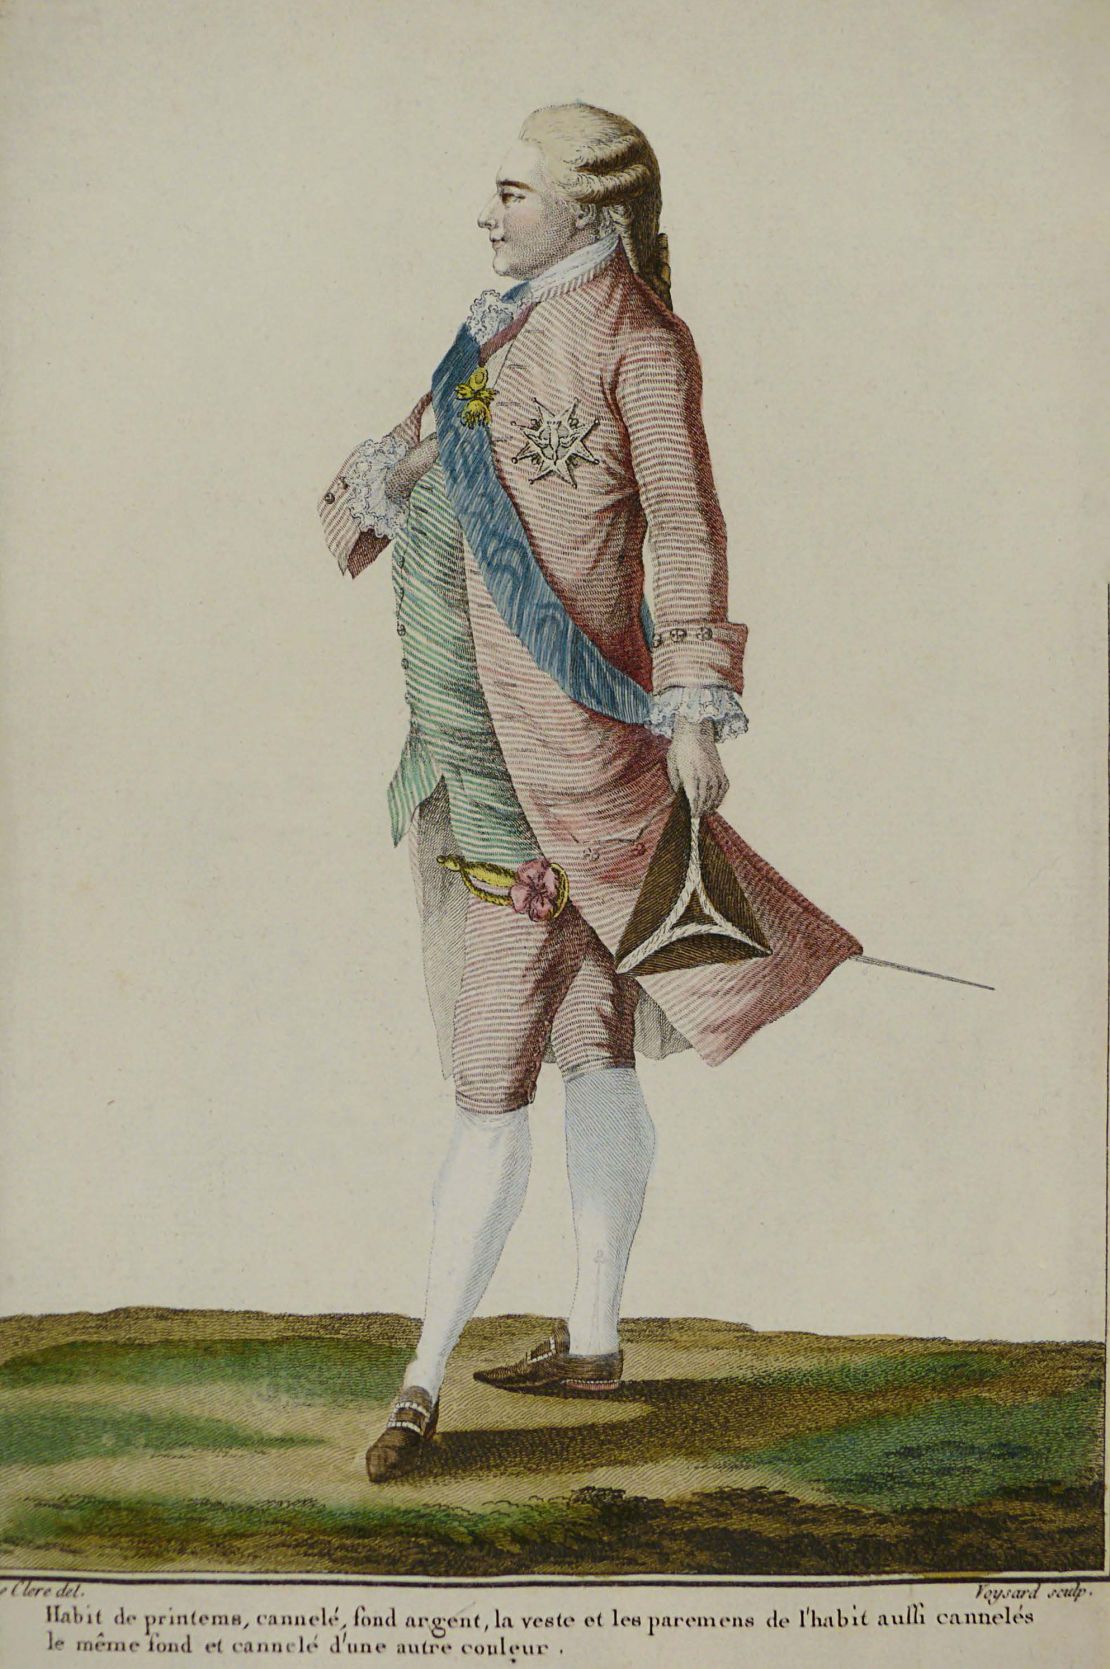 A 1779 image of a man dressed in pink, by Pierre-Thomas LeClerc.